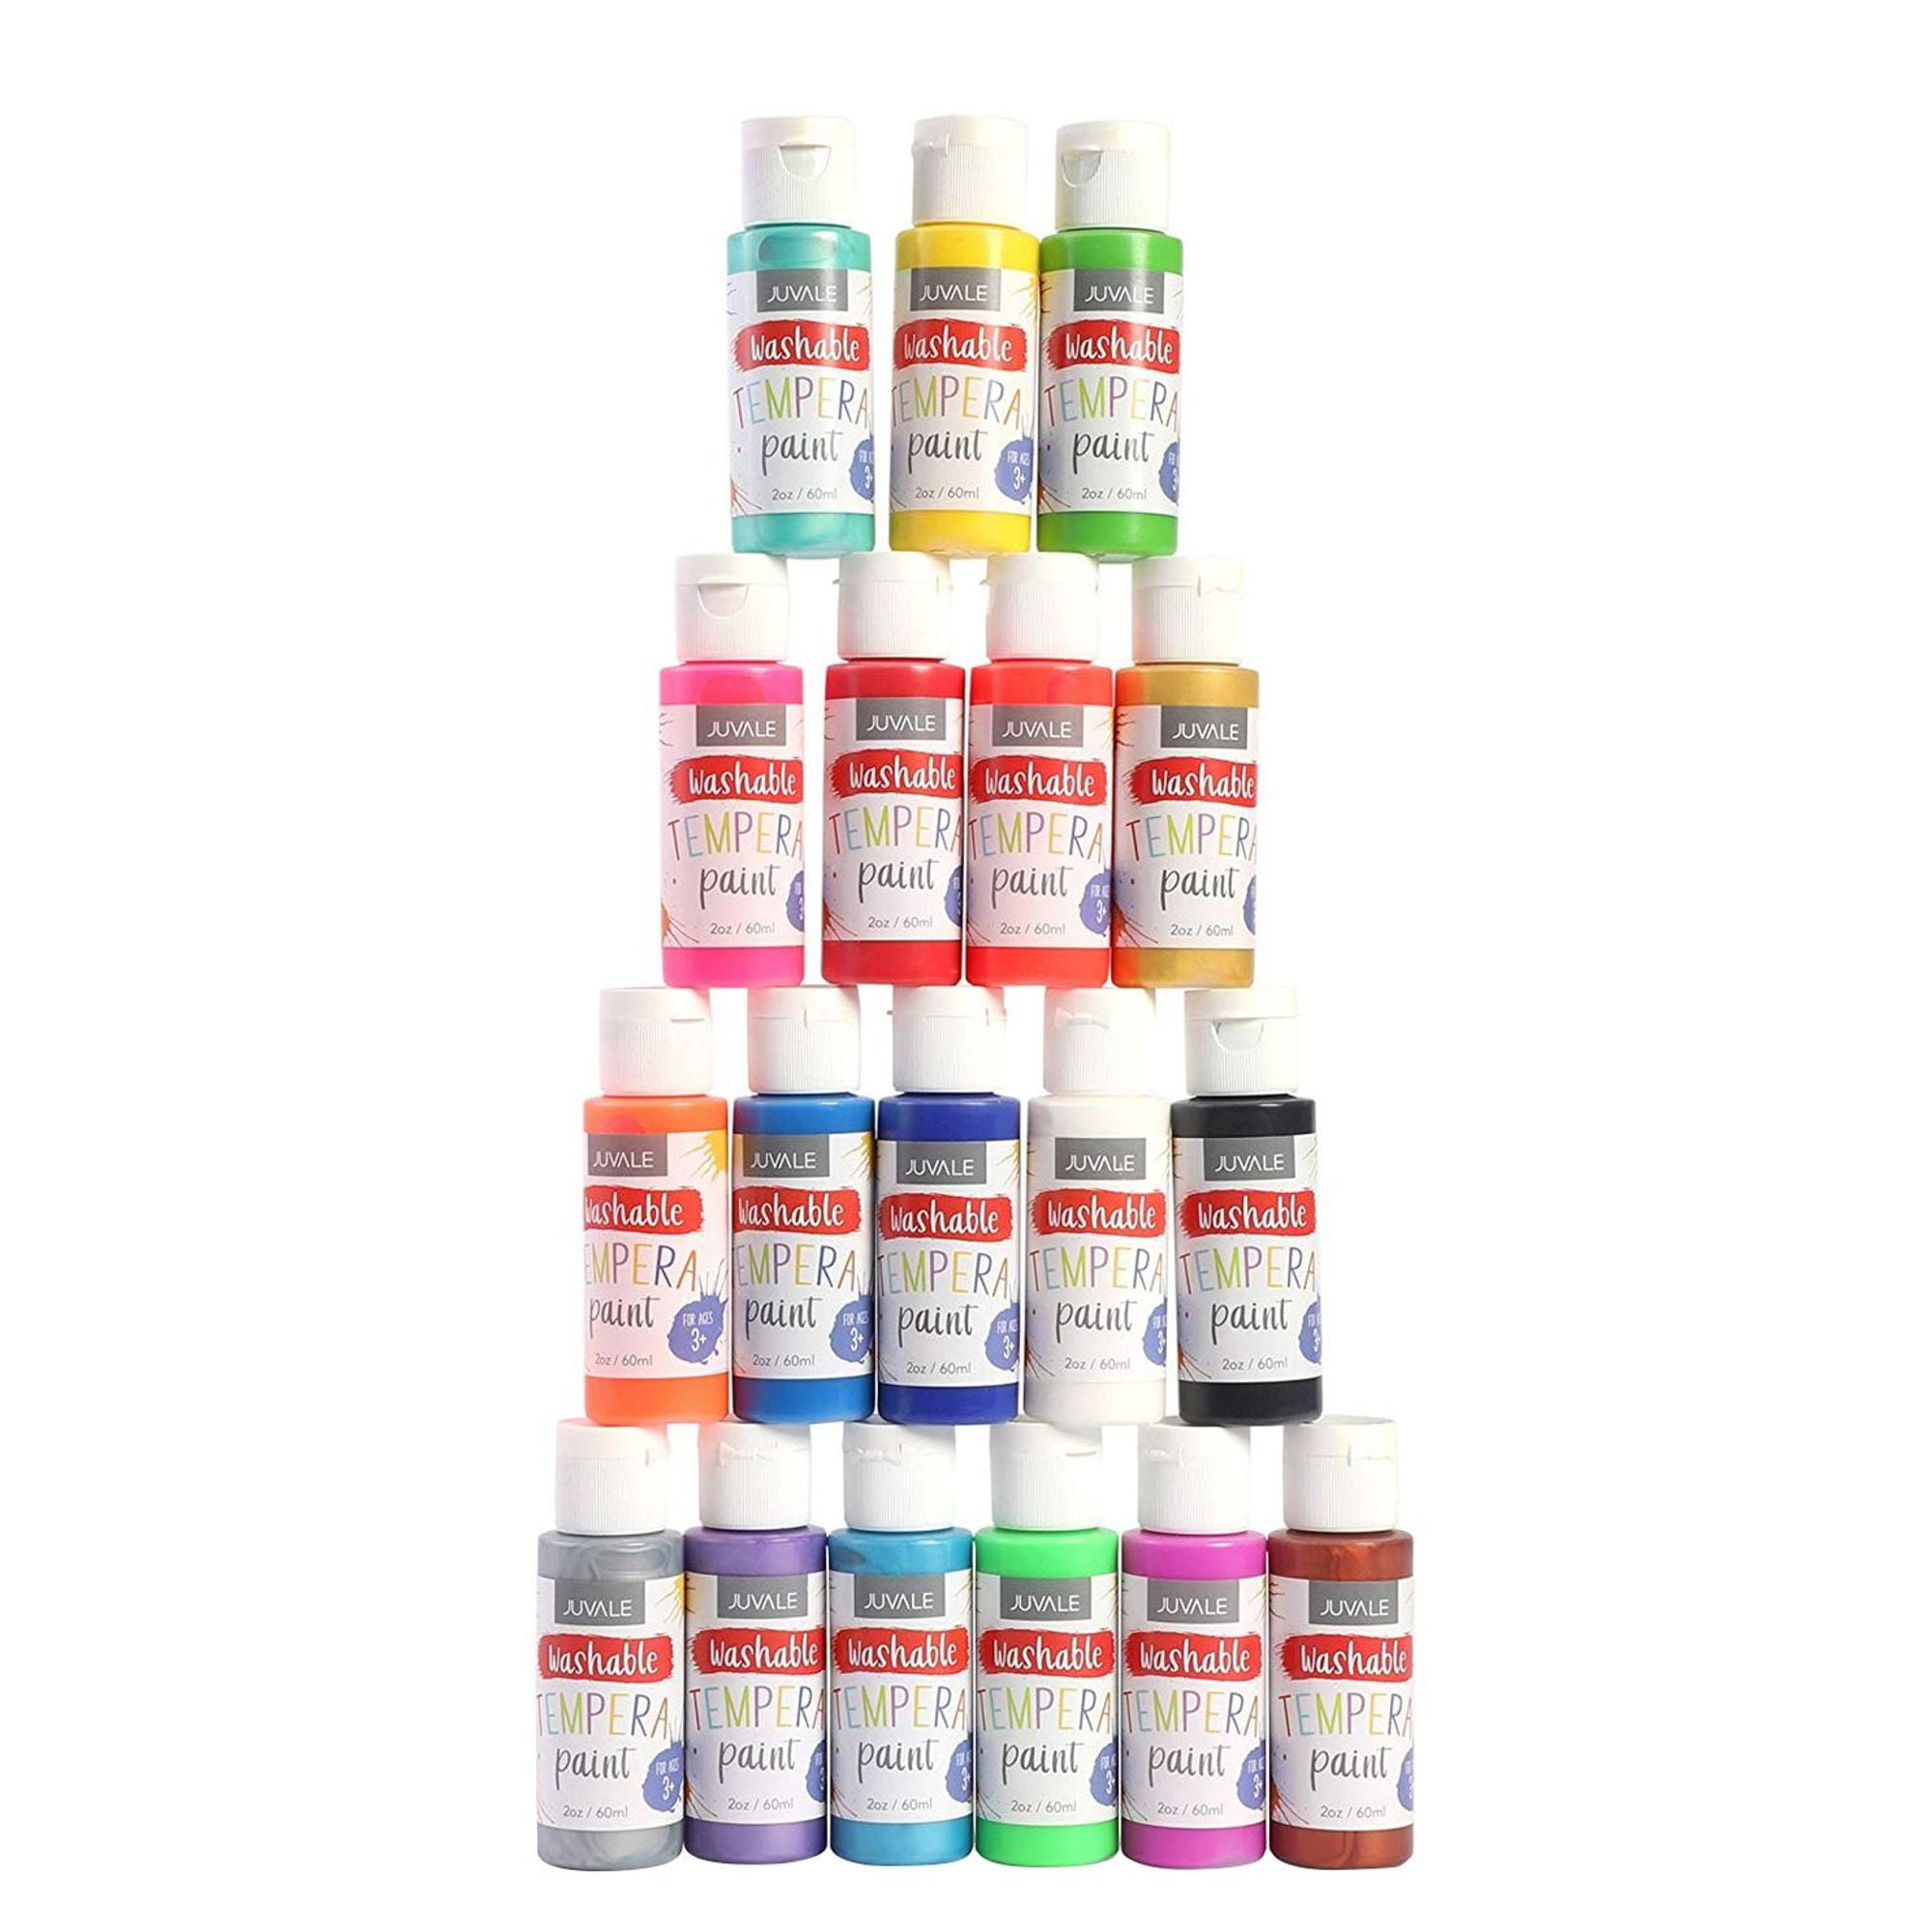 18 Packs Washable Tempera Paint Set for Kids Art Projects Painting Classrooms Schools DIY Art and Crafts, 2 oz, Multicolored